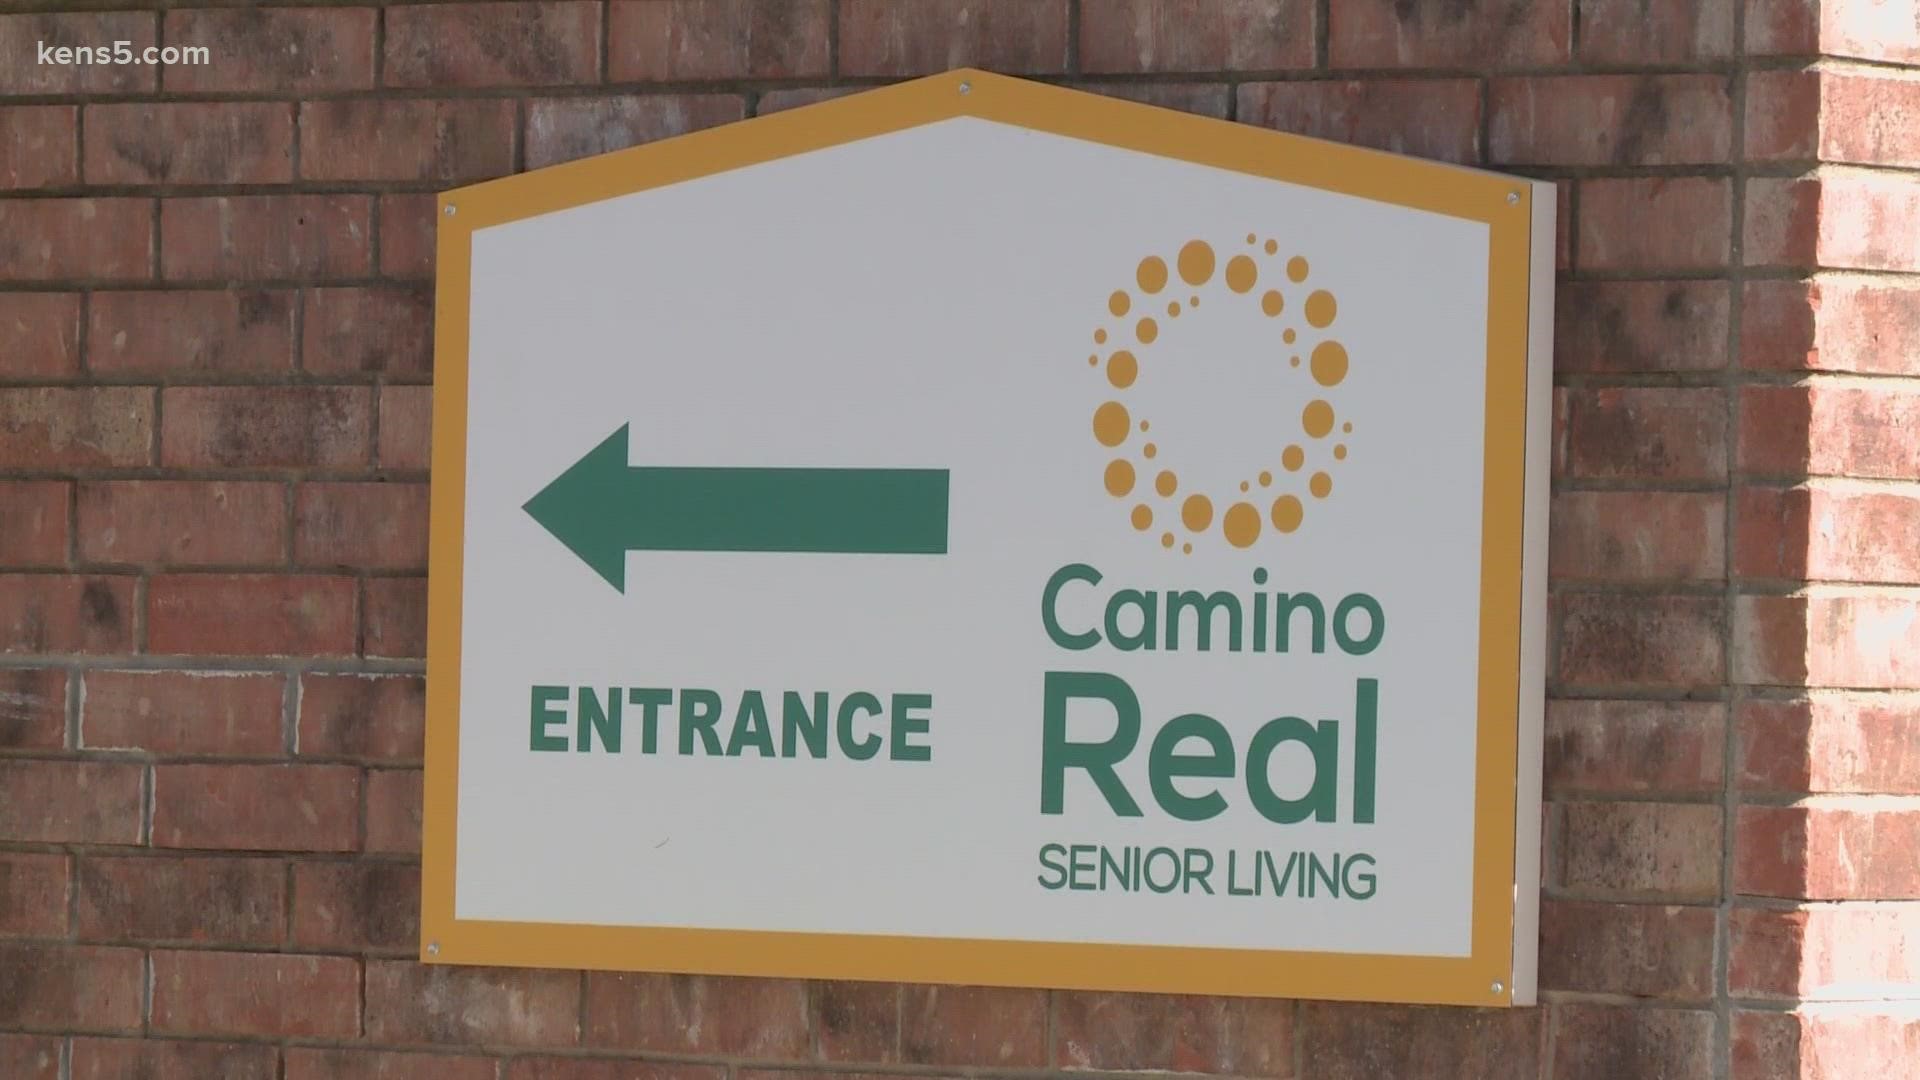 Camino Real Senior Living came under fire after a man documented a serious bug problem in his father's room. Over 100 residents now must move out.